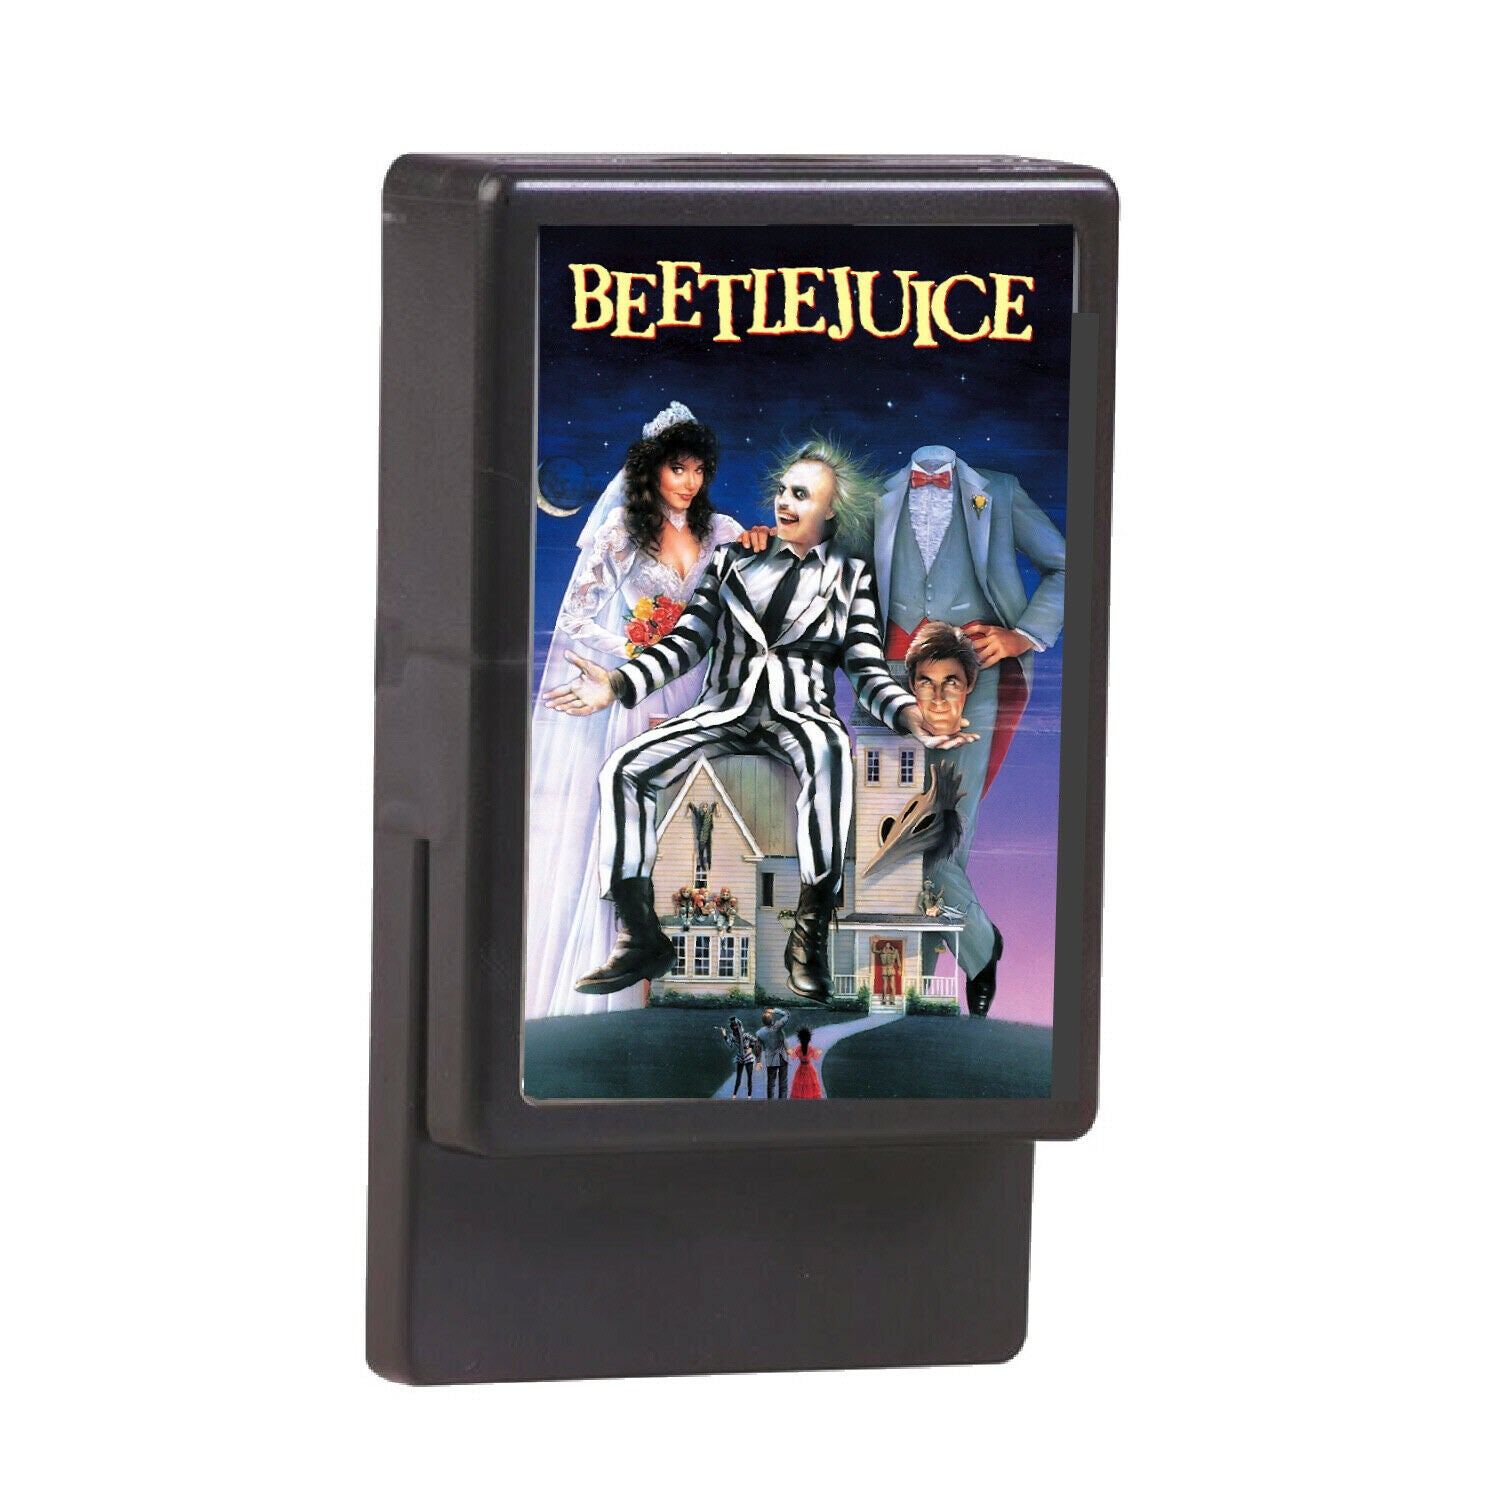 Beetlejuice Mini Poster Magnetic Display Clip Big 4 inches